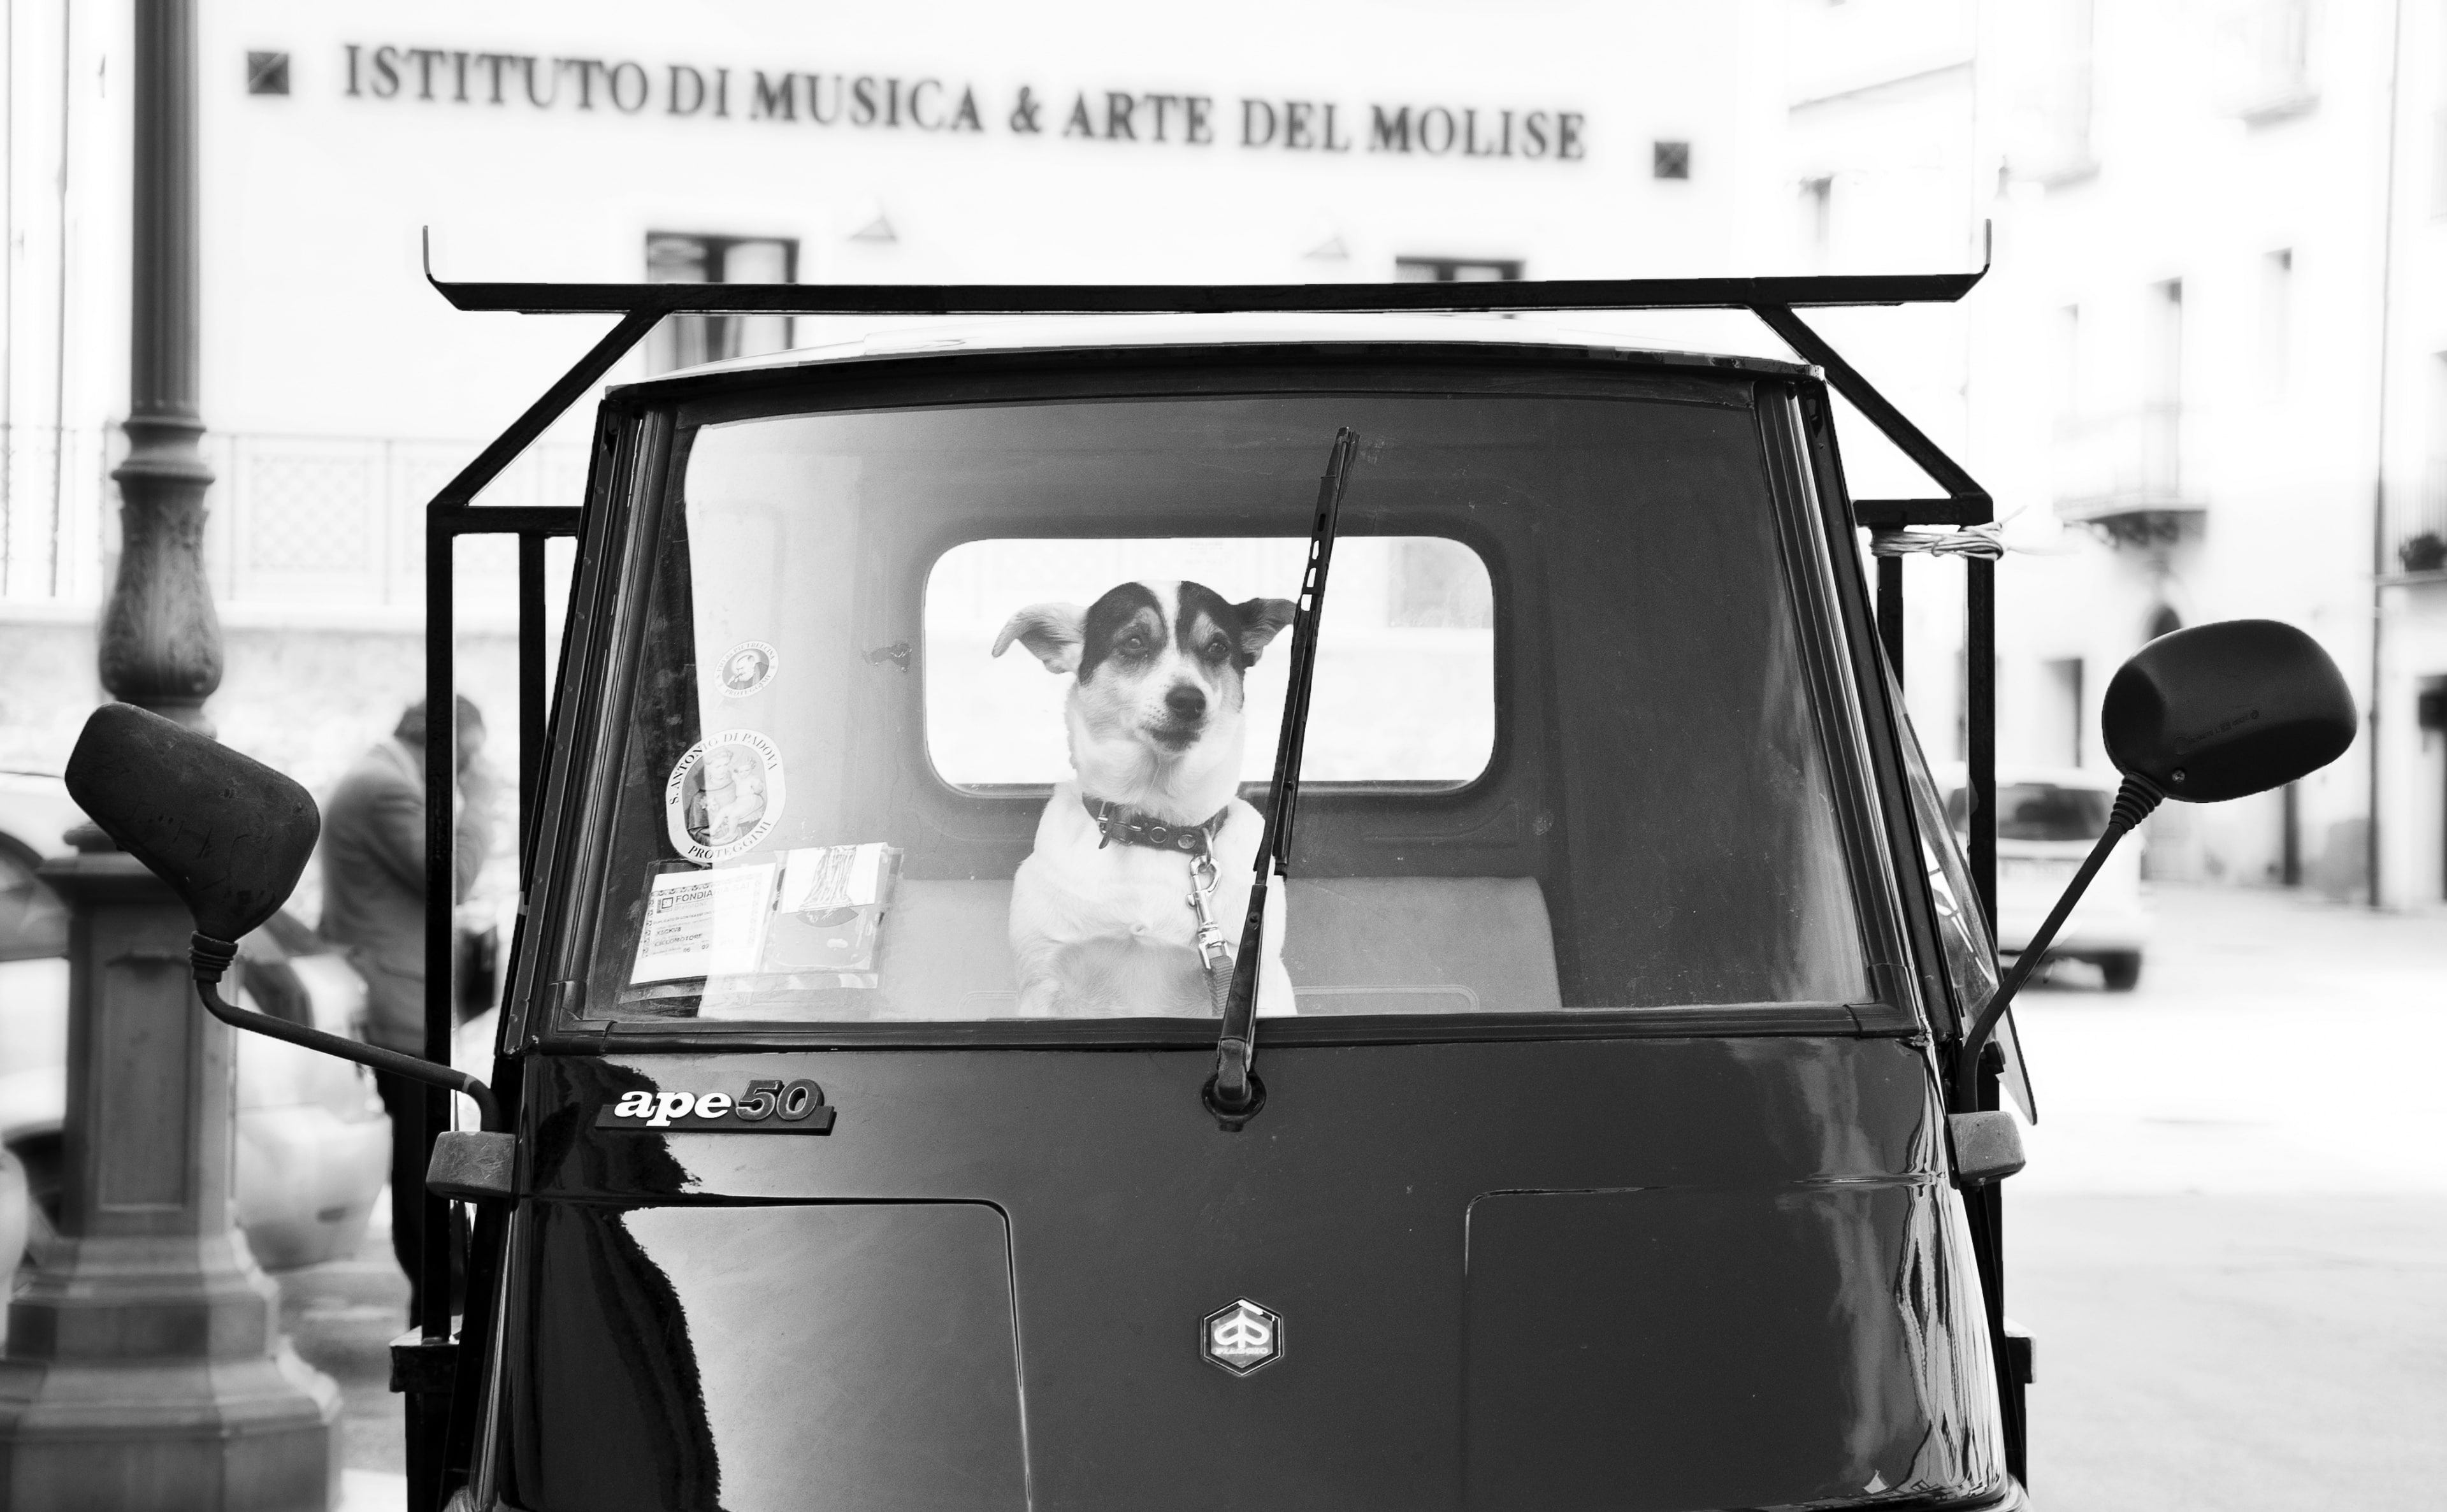 A Mans Best Friend, Black and White, Italy, Stray, apecar, campobasso